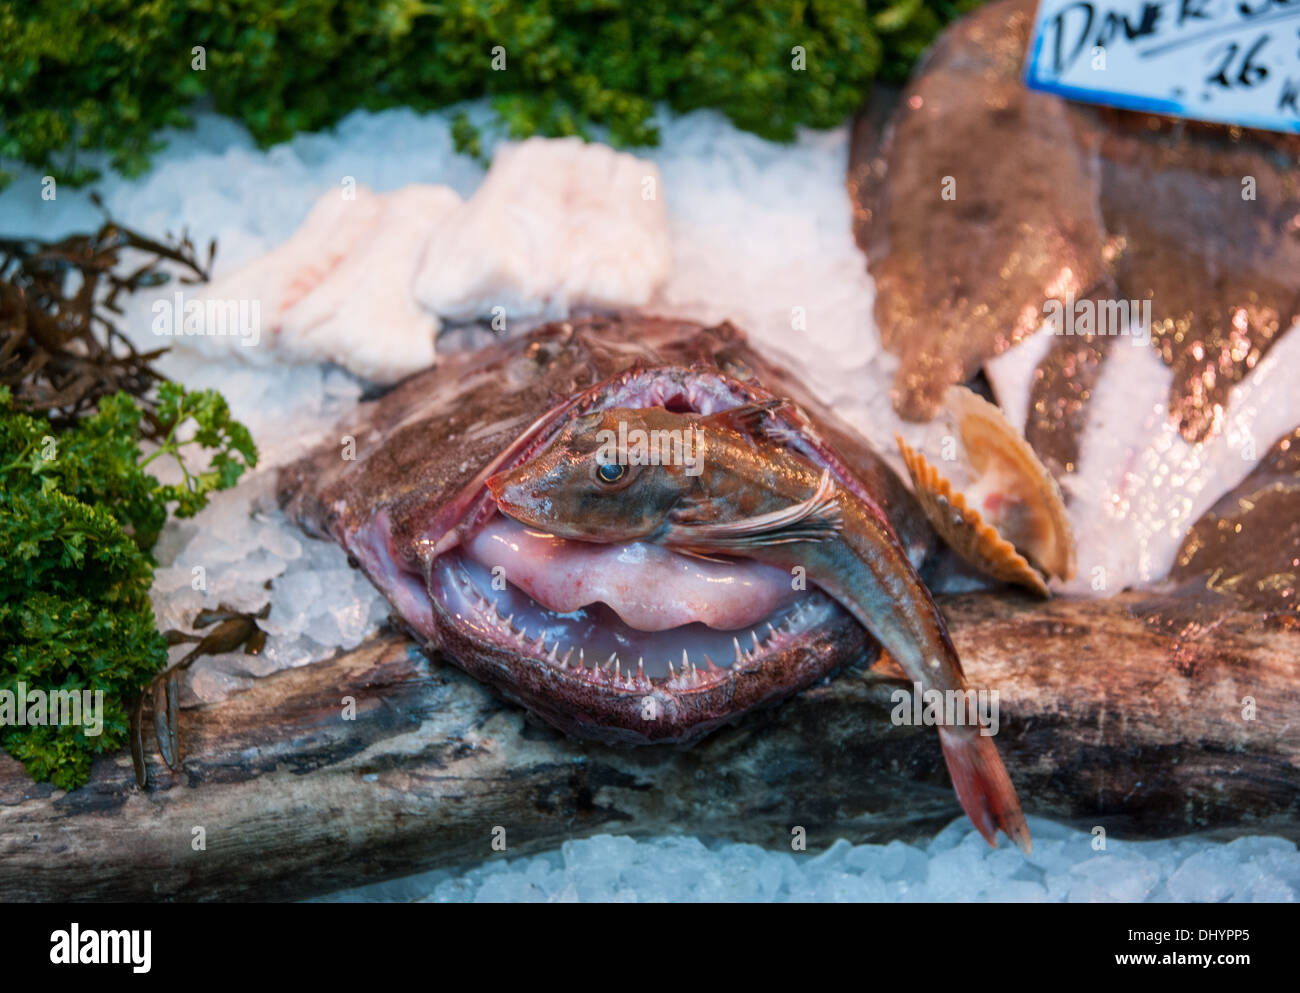 Wet fish stall with a monkfish and gurnard in Borough Market London SE1 UK Stock Photo